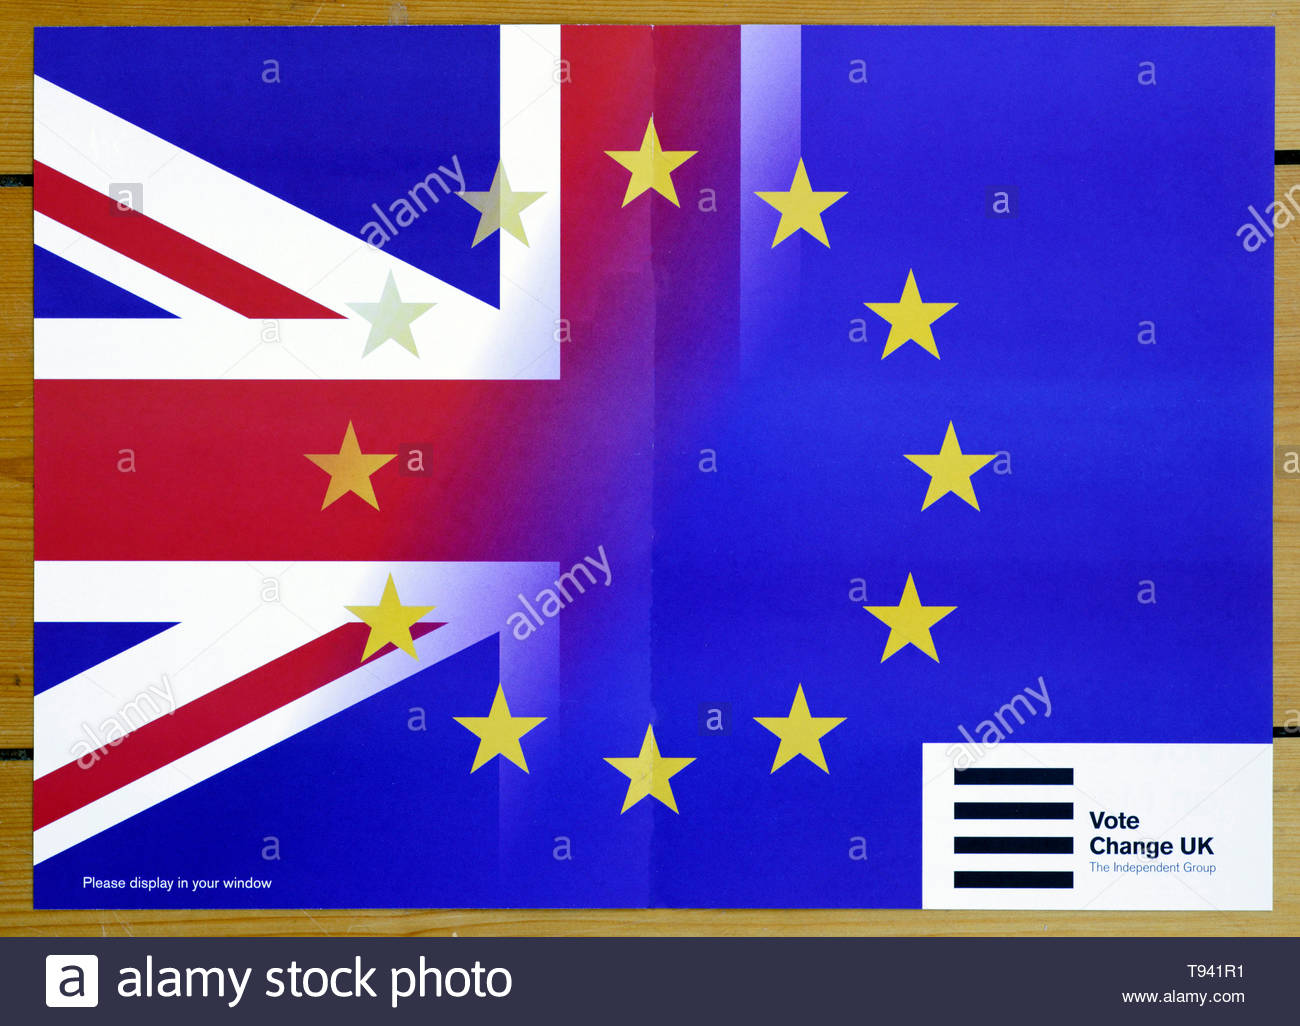 Change UK Party European elections 2019 campaign leaflet Stock Photo